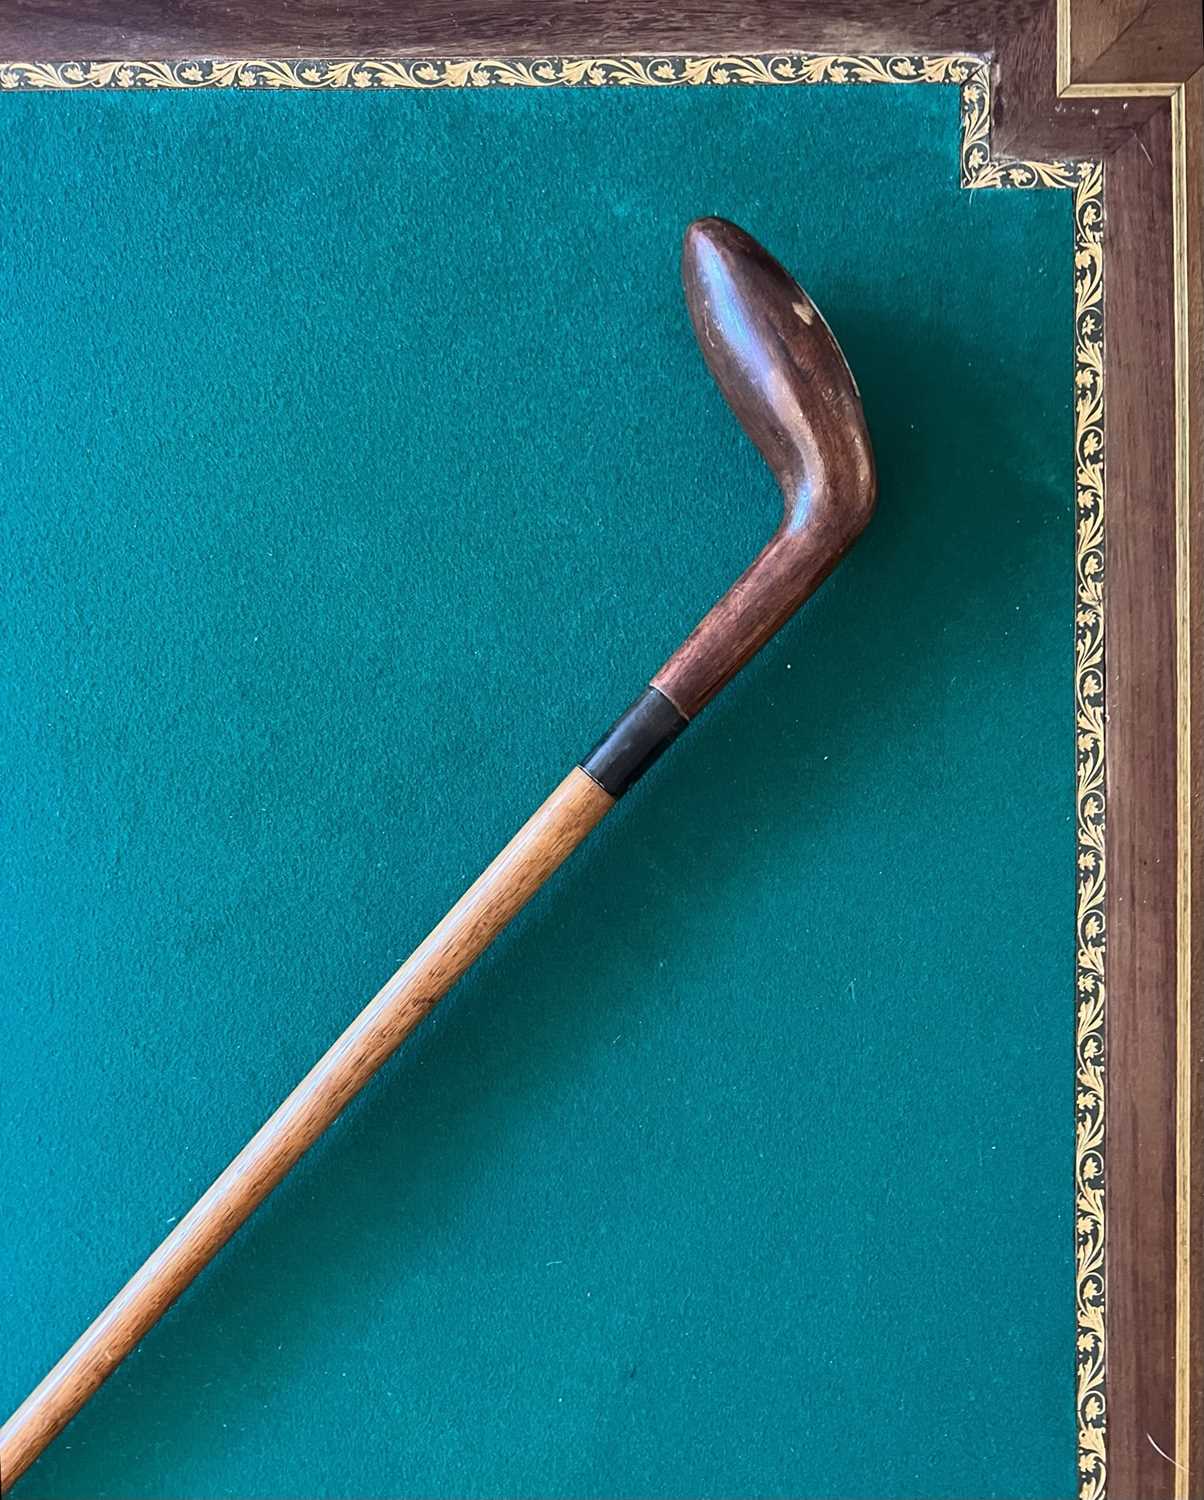 GOLFING INTEREST: A LATE 19TH / EARLY 20TH CENTURY WALKING CANE IN THE FORM OF A GOLF CLUB